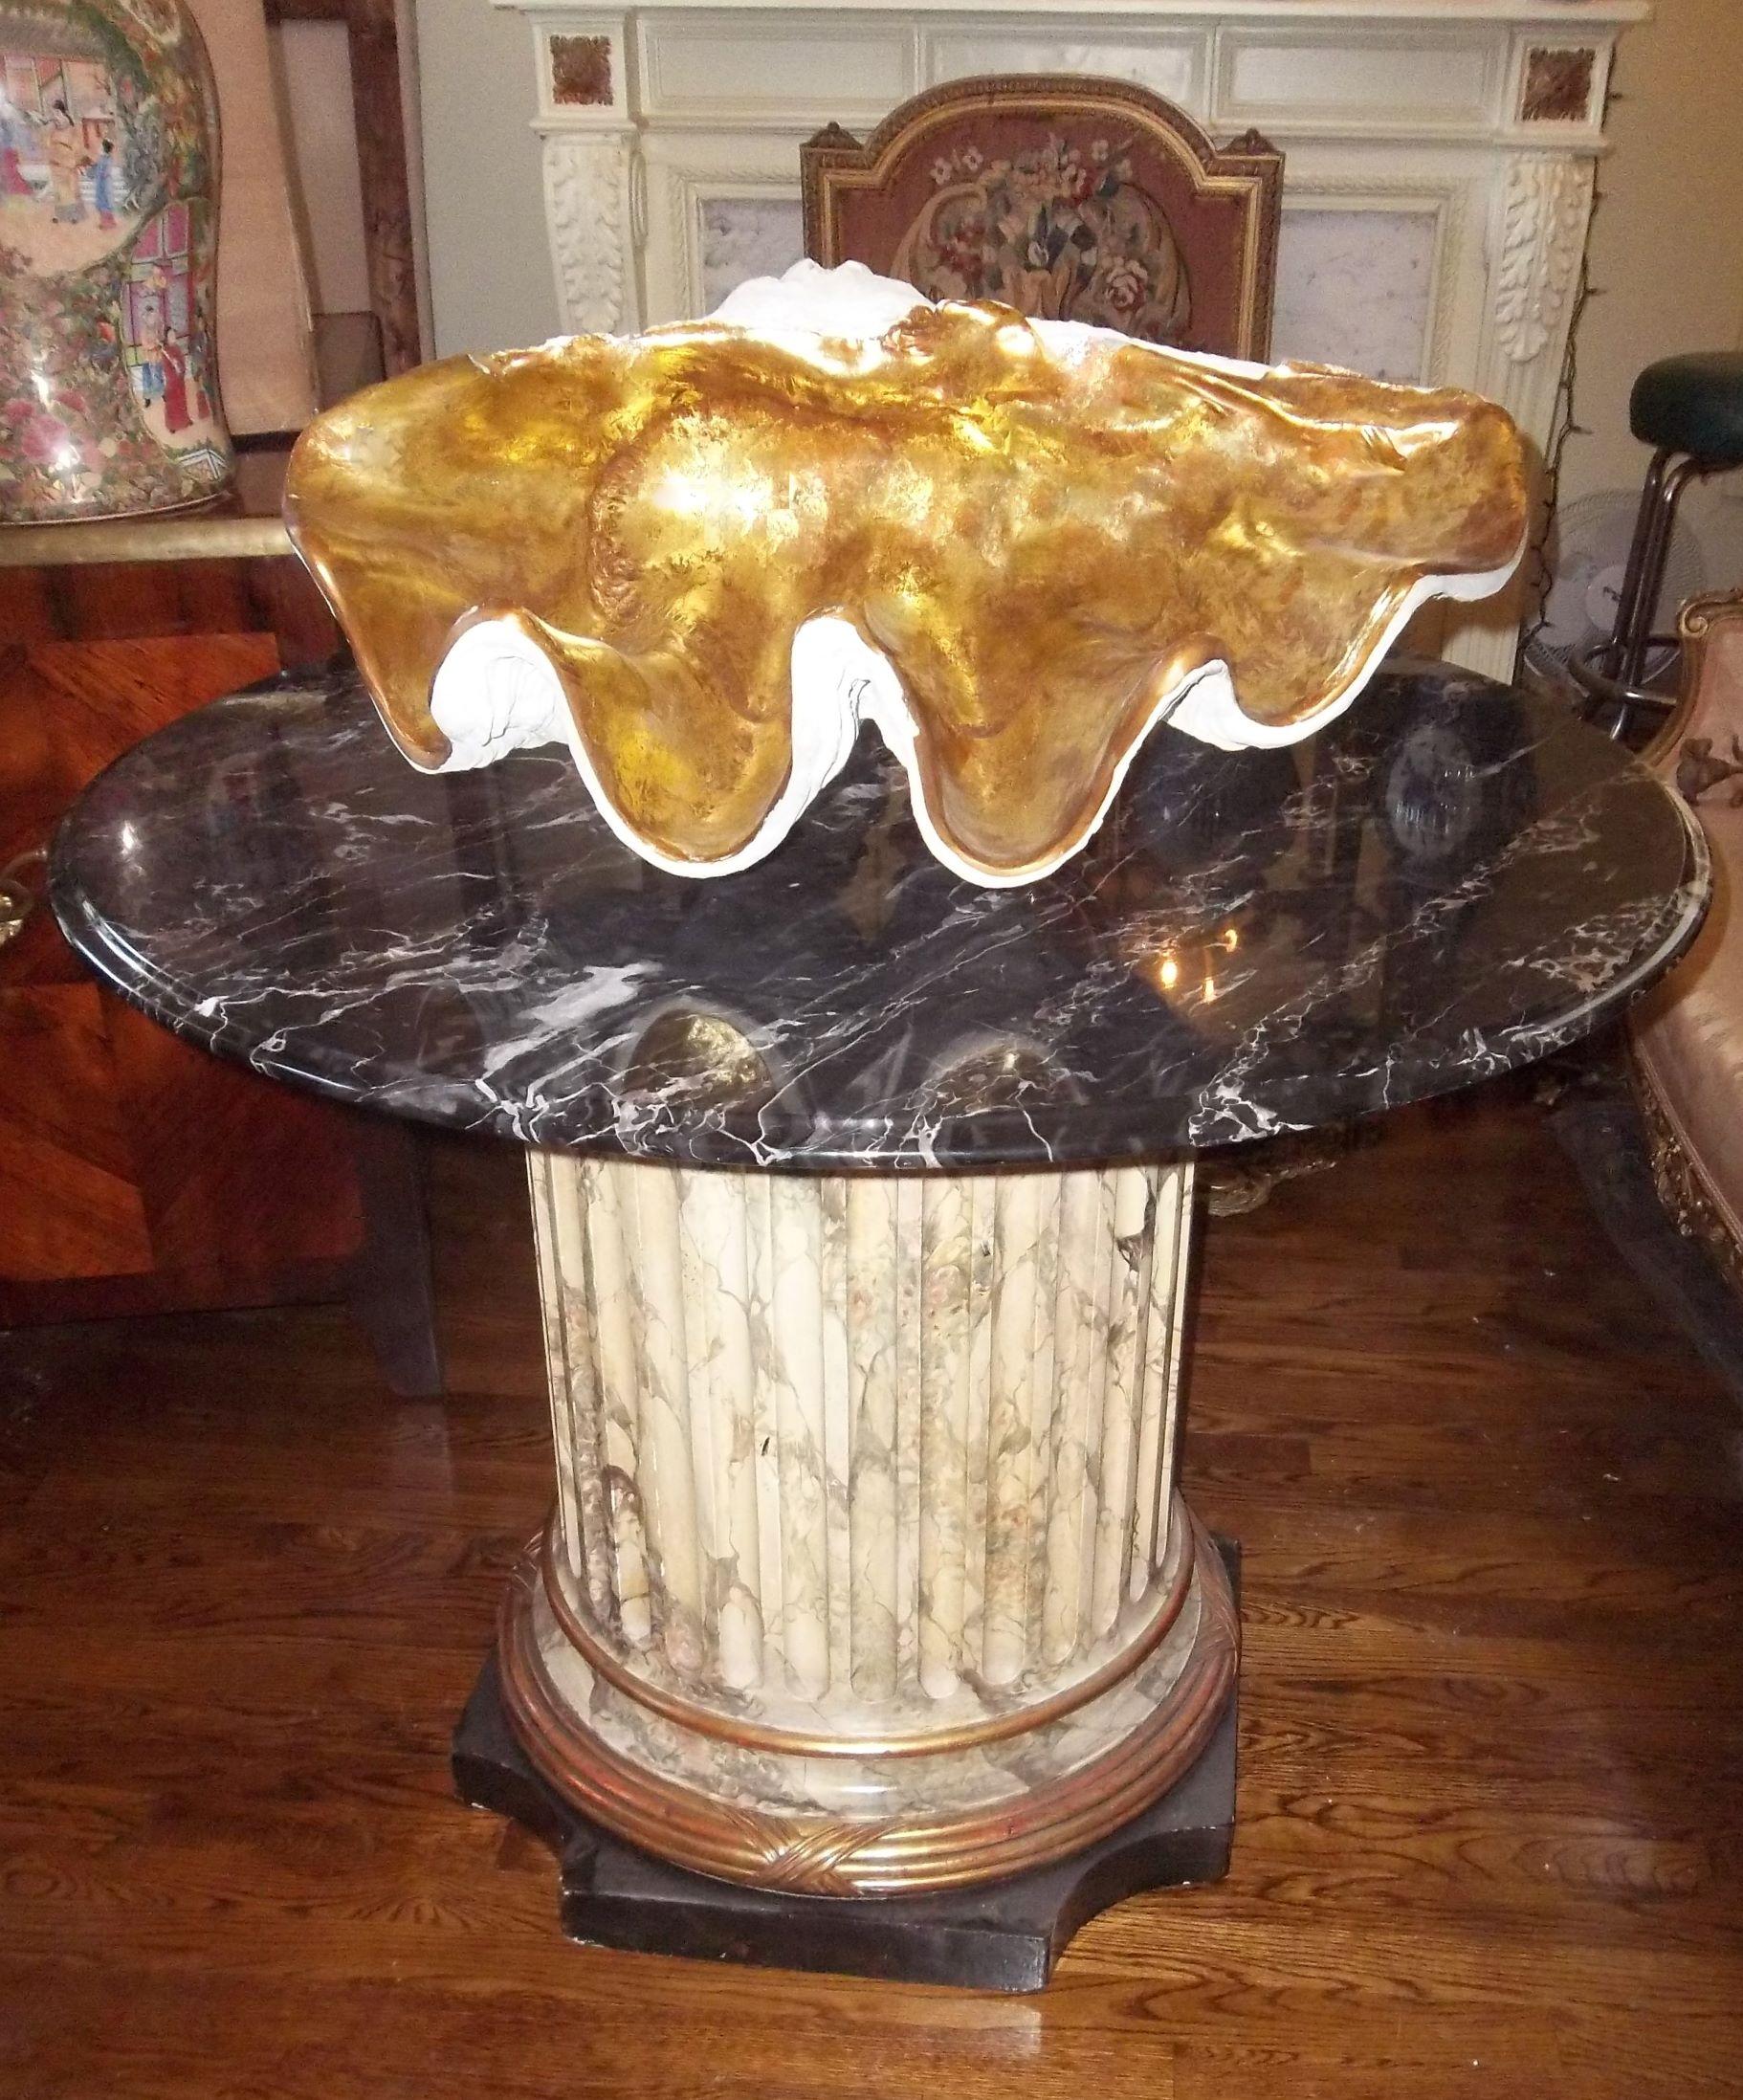 Probably mid-20th century, composite material, probably spun fiberglass (a popular medium of the era, durable and lightweight). Realistically cast and the inside gilded. A jardiniere, a table centerpiece, something for in front of the hearth in off